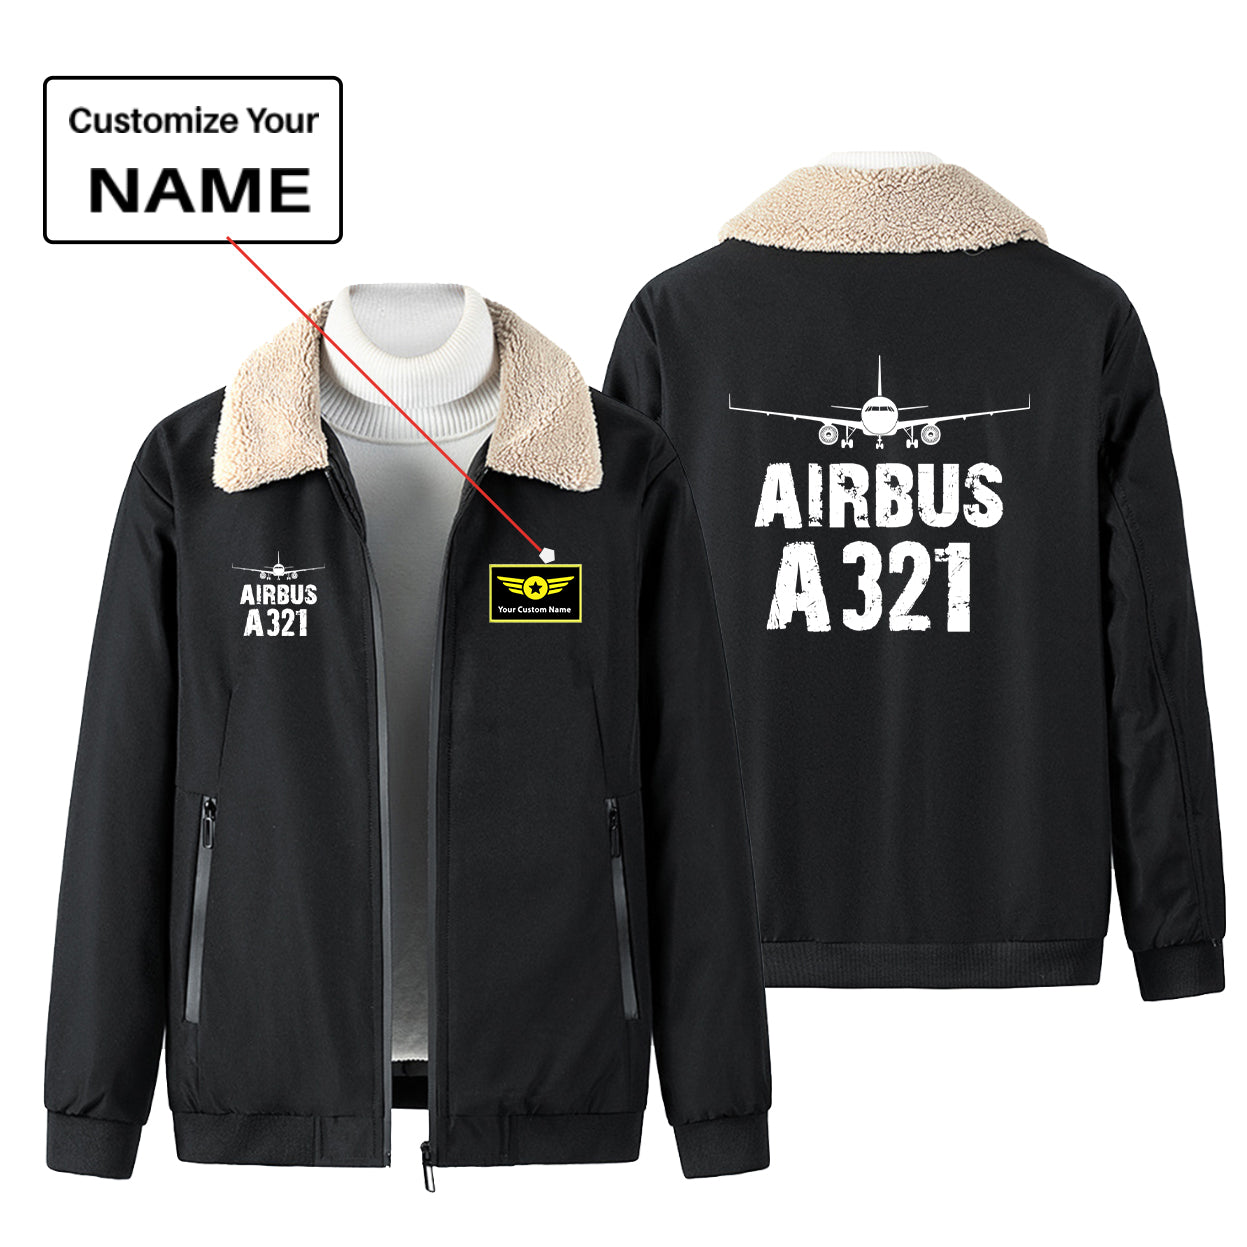 Airbus A321 & Plane Designed Winter Bomber Jackets